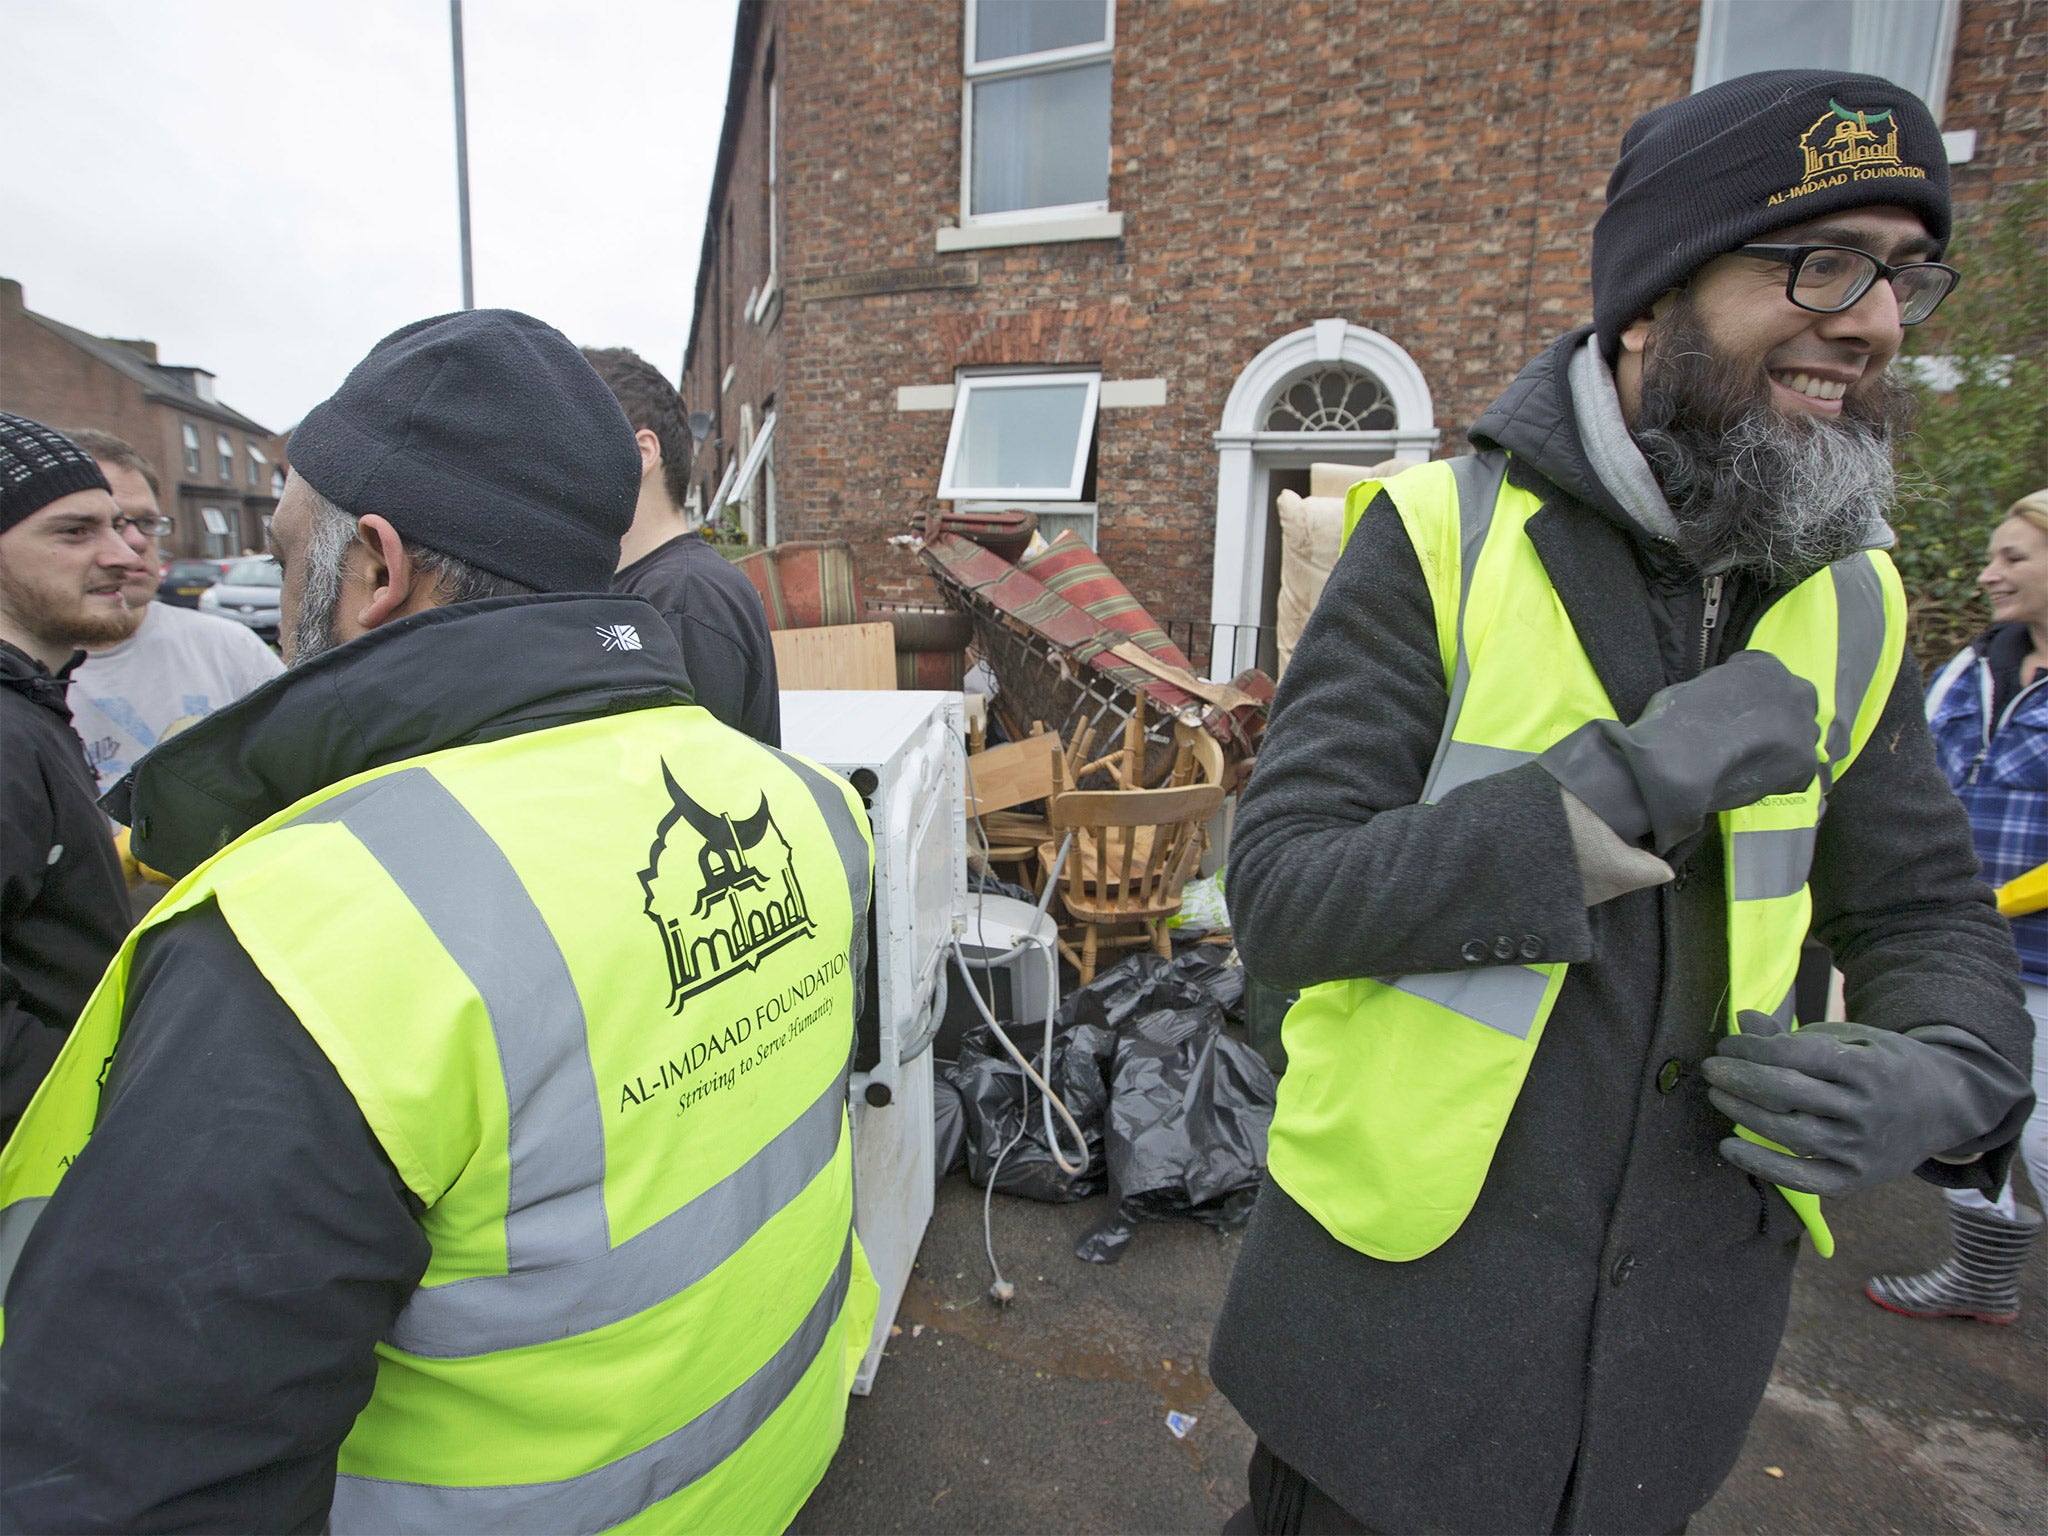 Members of the Al-Imdaad Foundation help remove furniture from a house in Carlisle